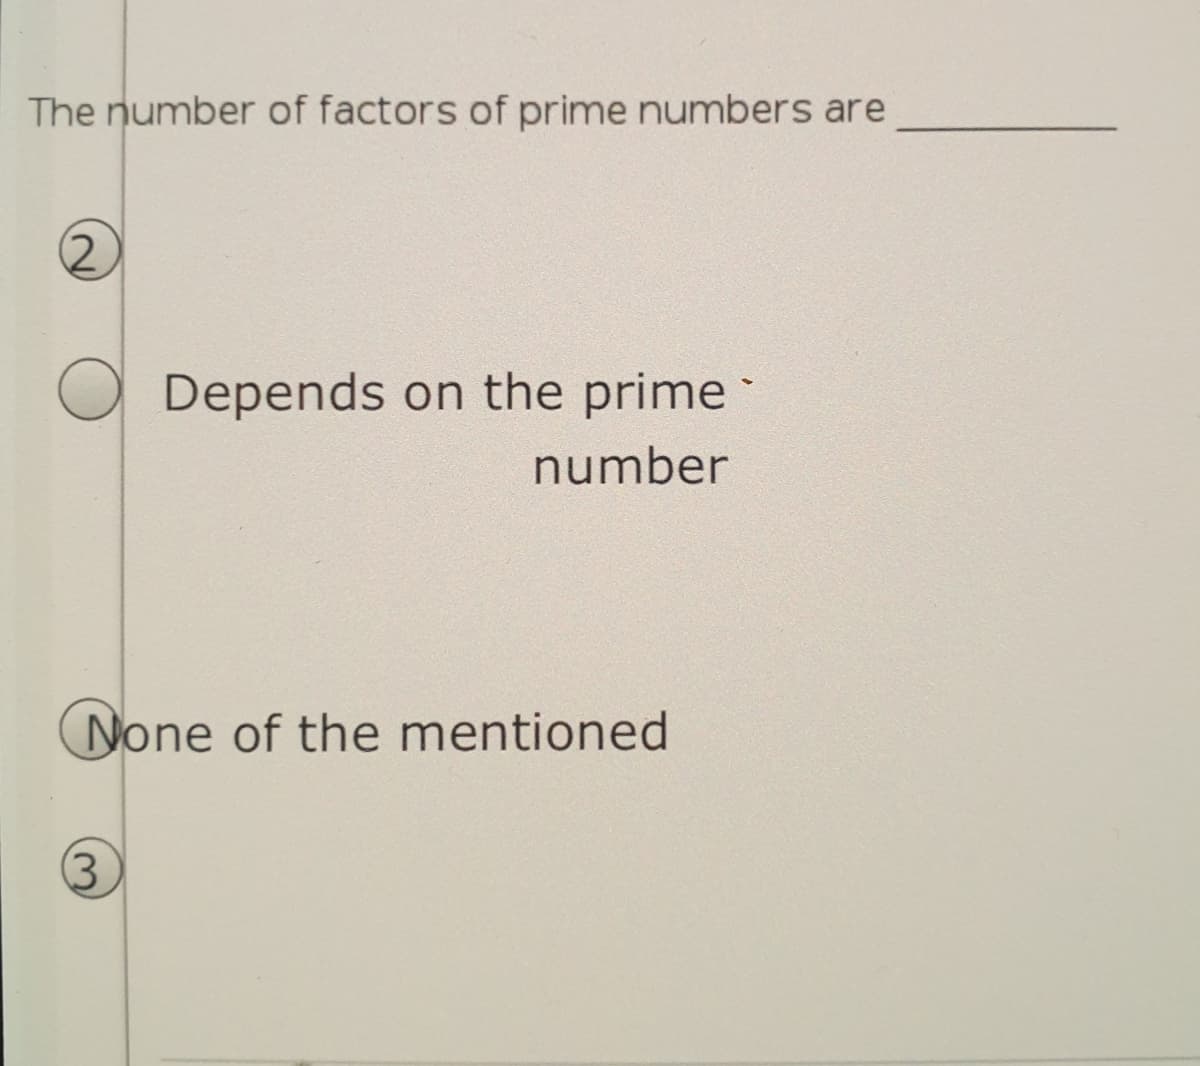 The number of factors of prime numbers are
(2,
Depends on the prime
number
None of the mentioned
(3
